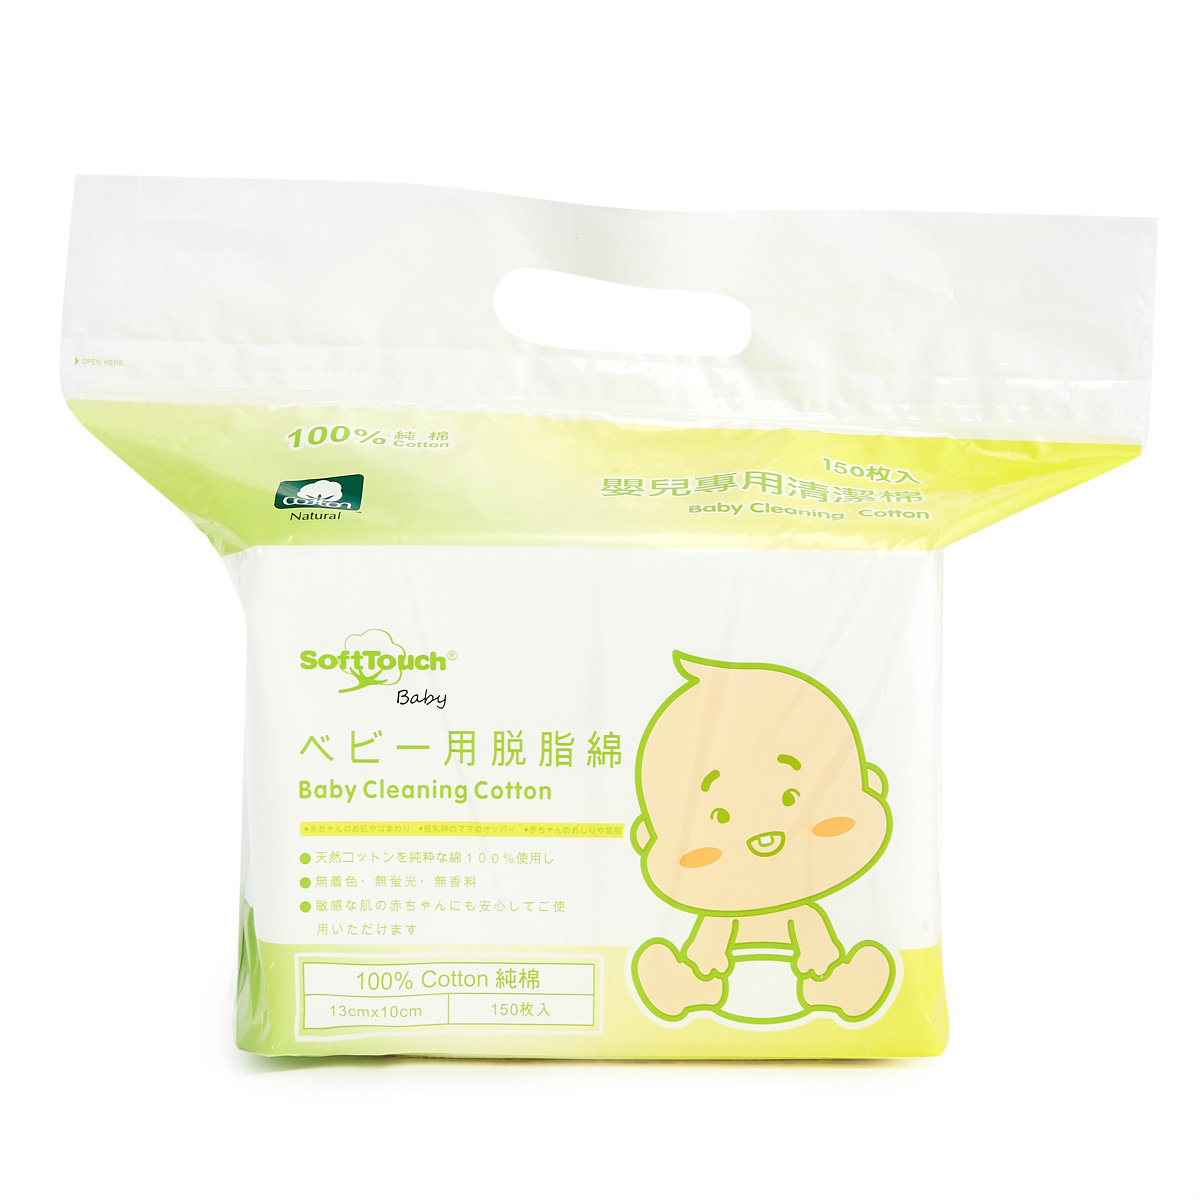 Ook Ophef Mier SoftTouch | Baby Cleaning Cotton | HKTVmall The Largest HK Shopping Platform